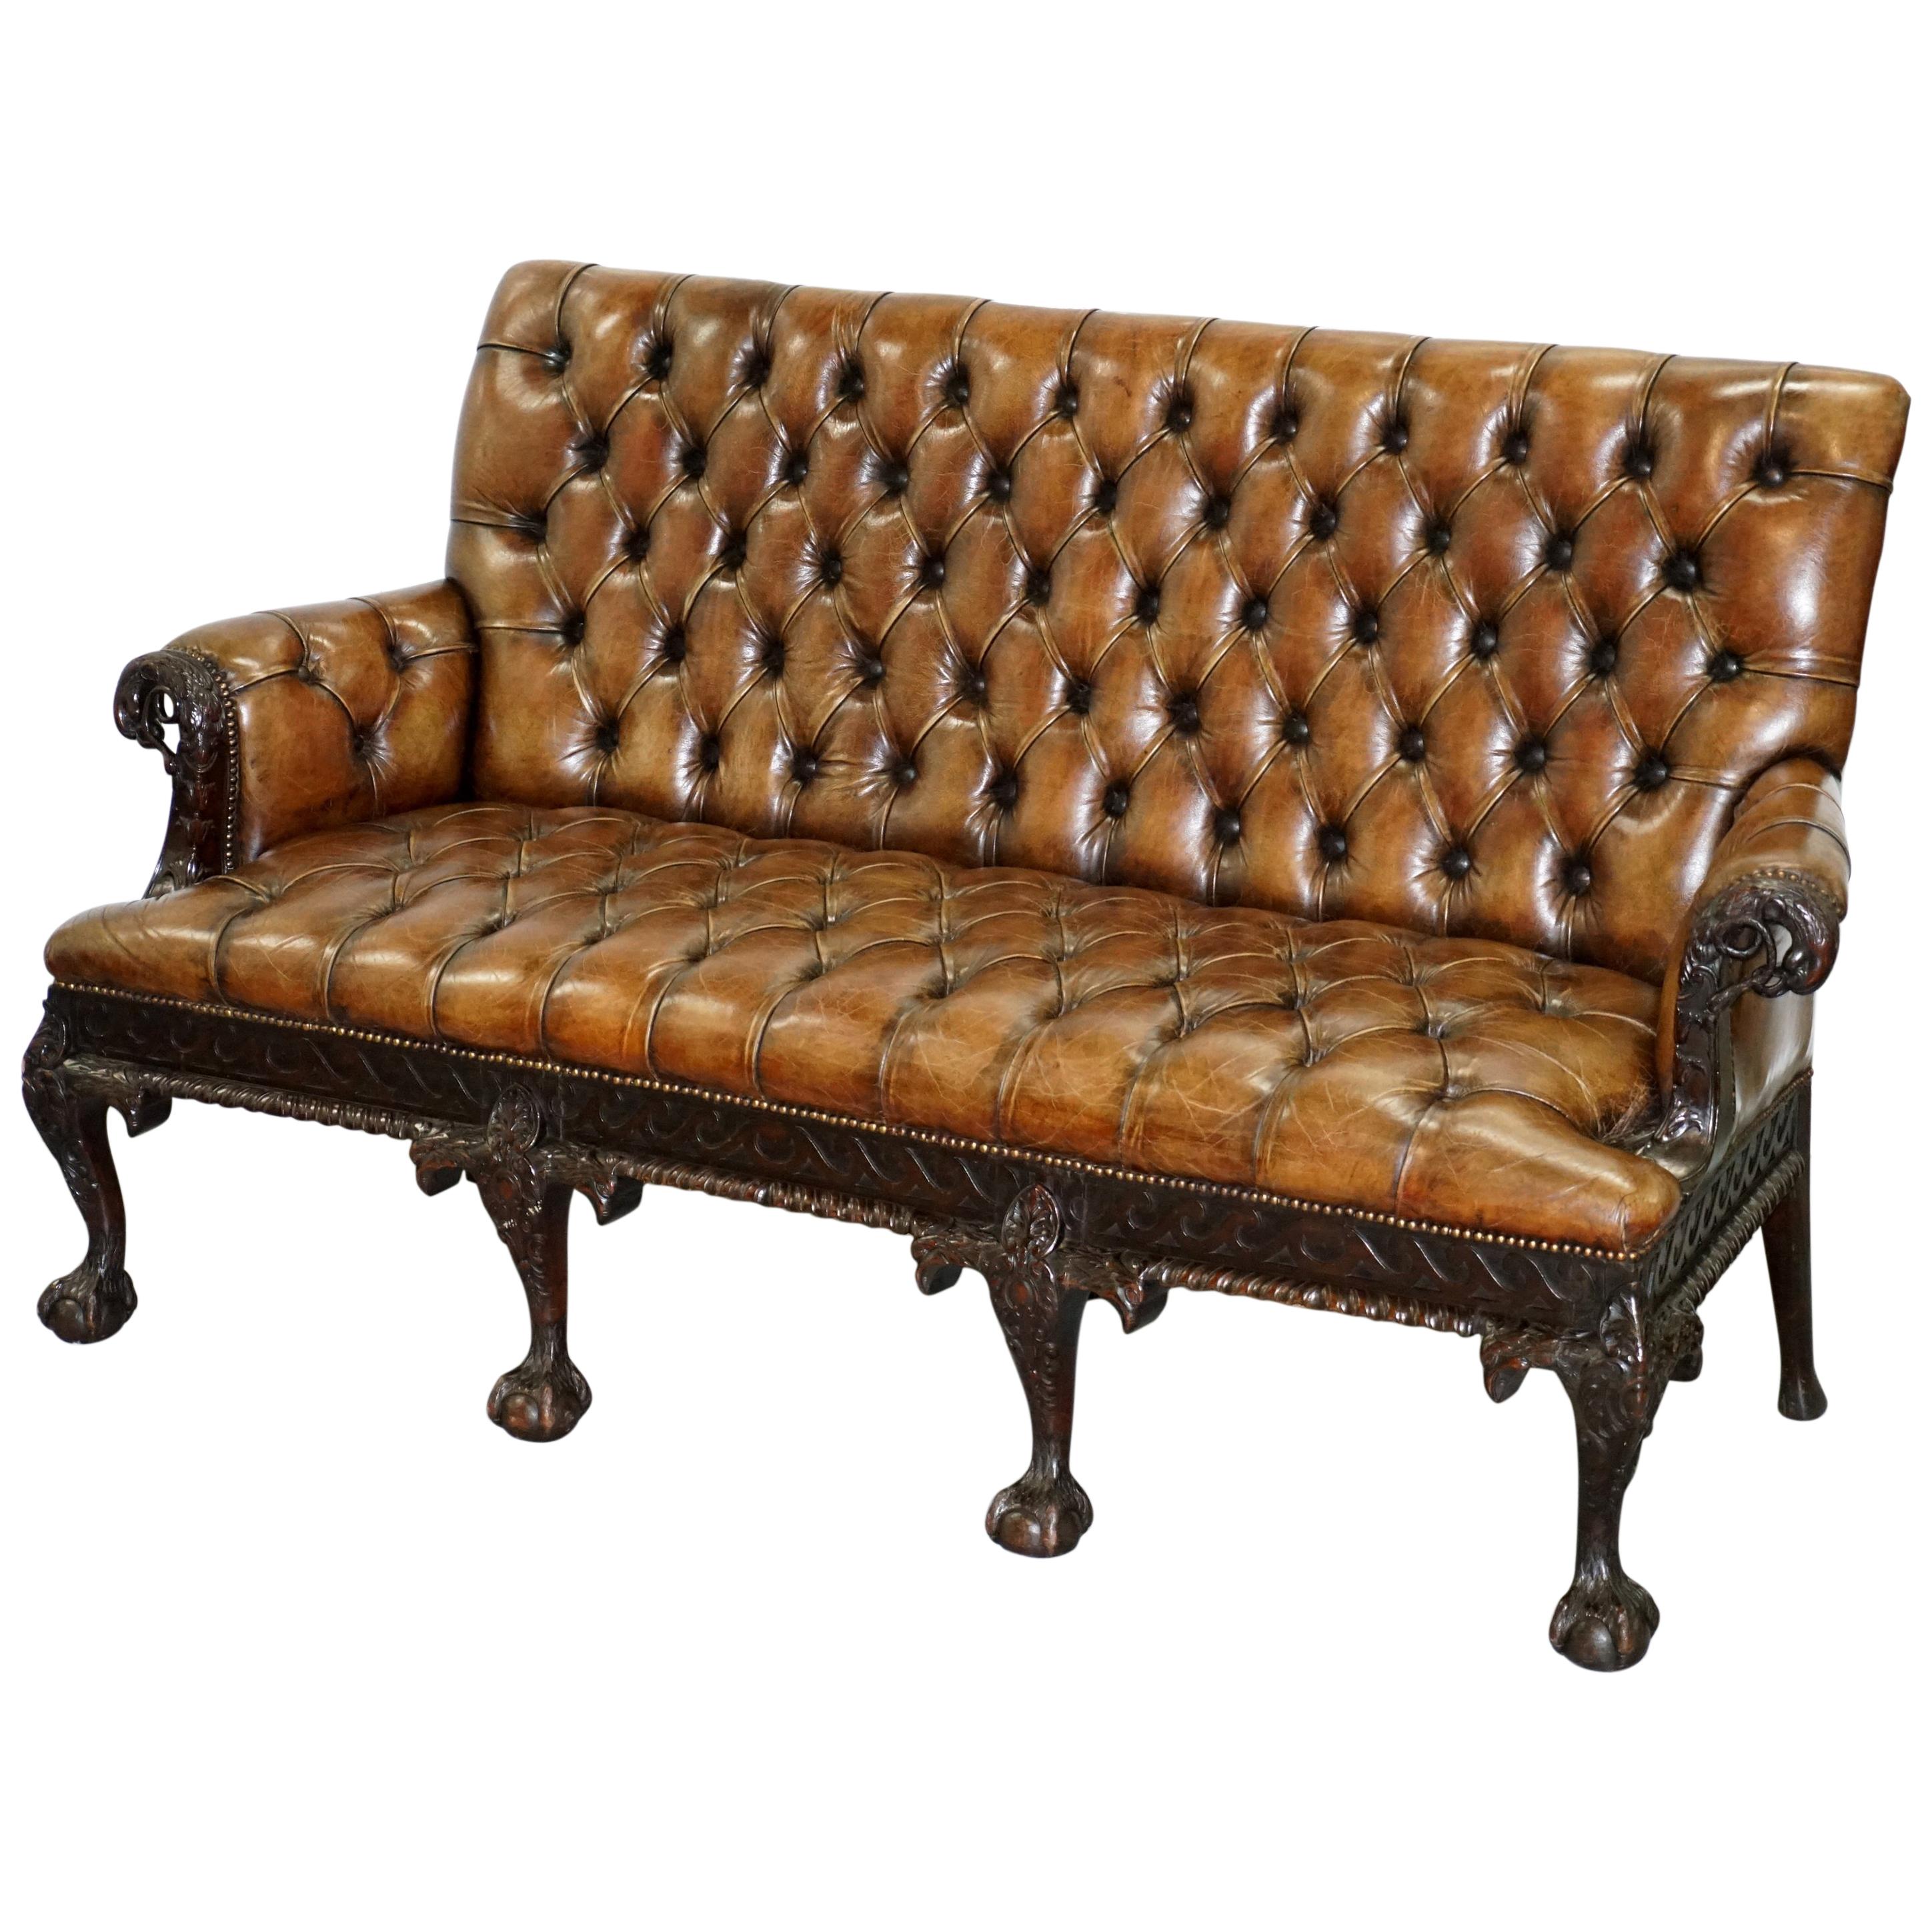 19th Century Hand Carved Hawk Claw and Ball Feet Chesterfield Sofa Brown Leather